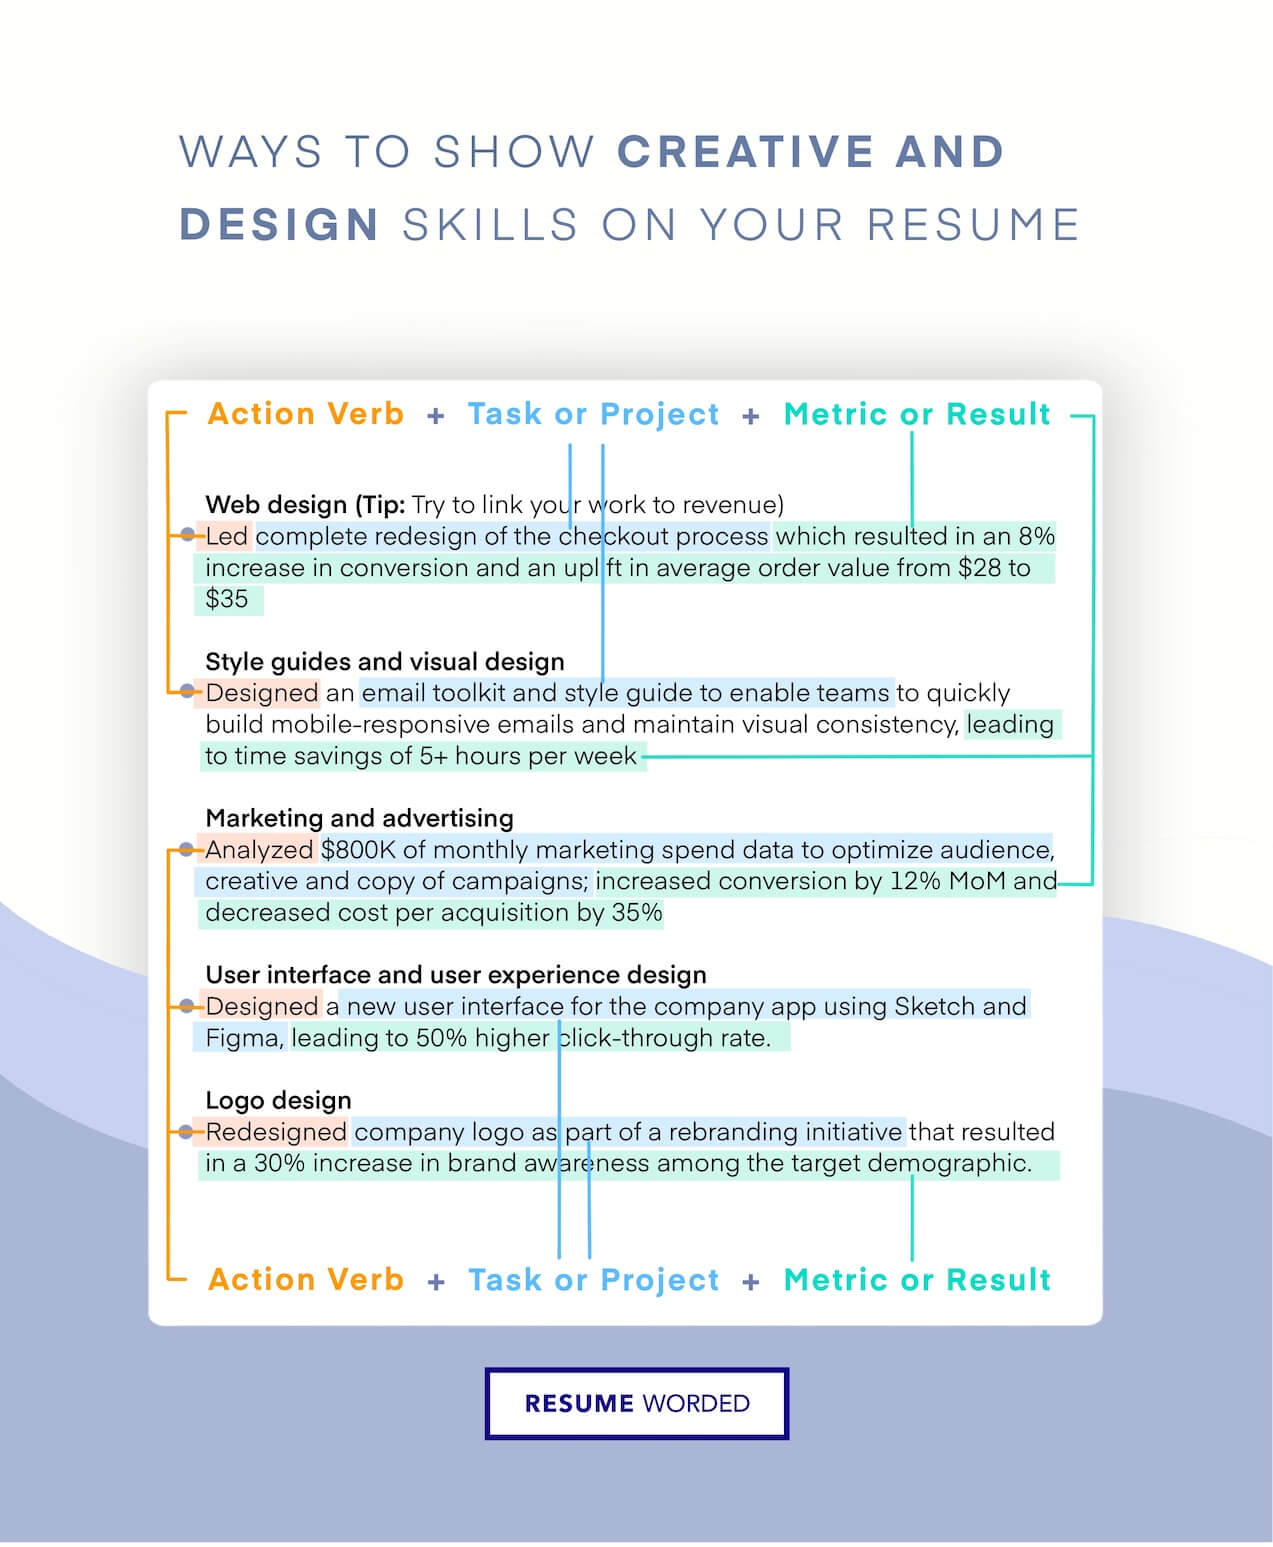 Talk about your experience with design or your UX/UI skills. - Java Full Stack Developer Resume